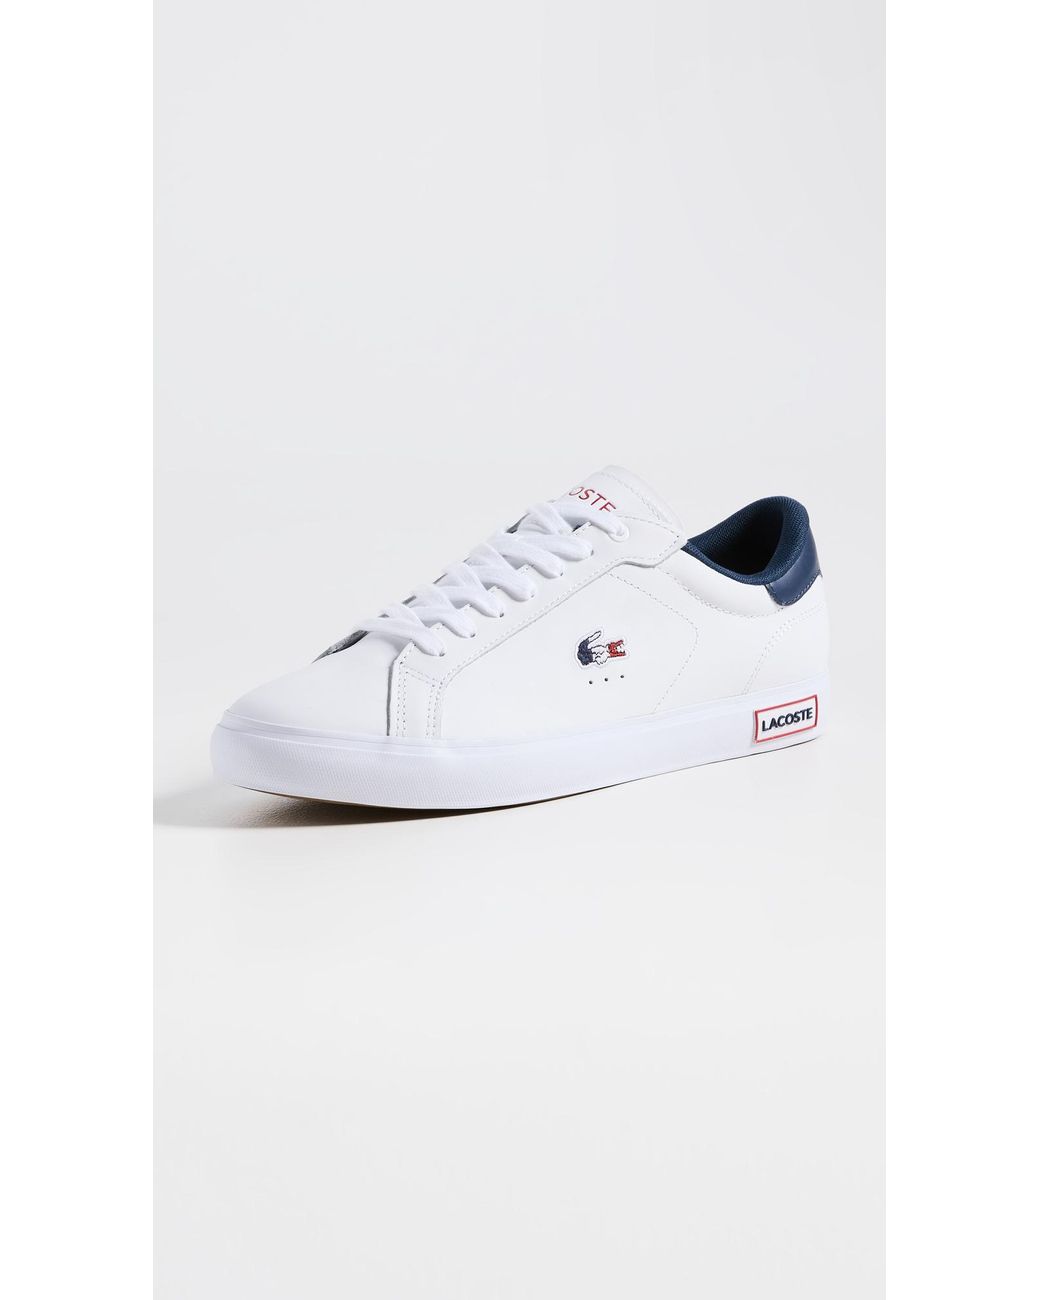 Lacoste Powercourt Leather Tricolor Sneakers in White for Men | Lyst